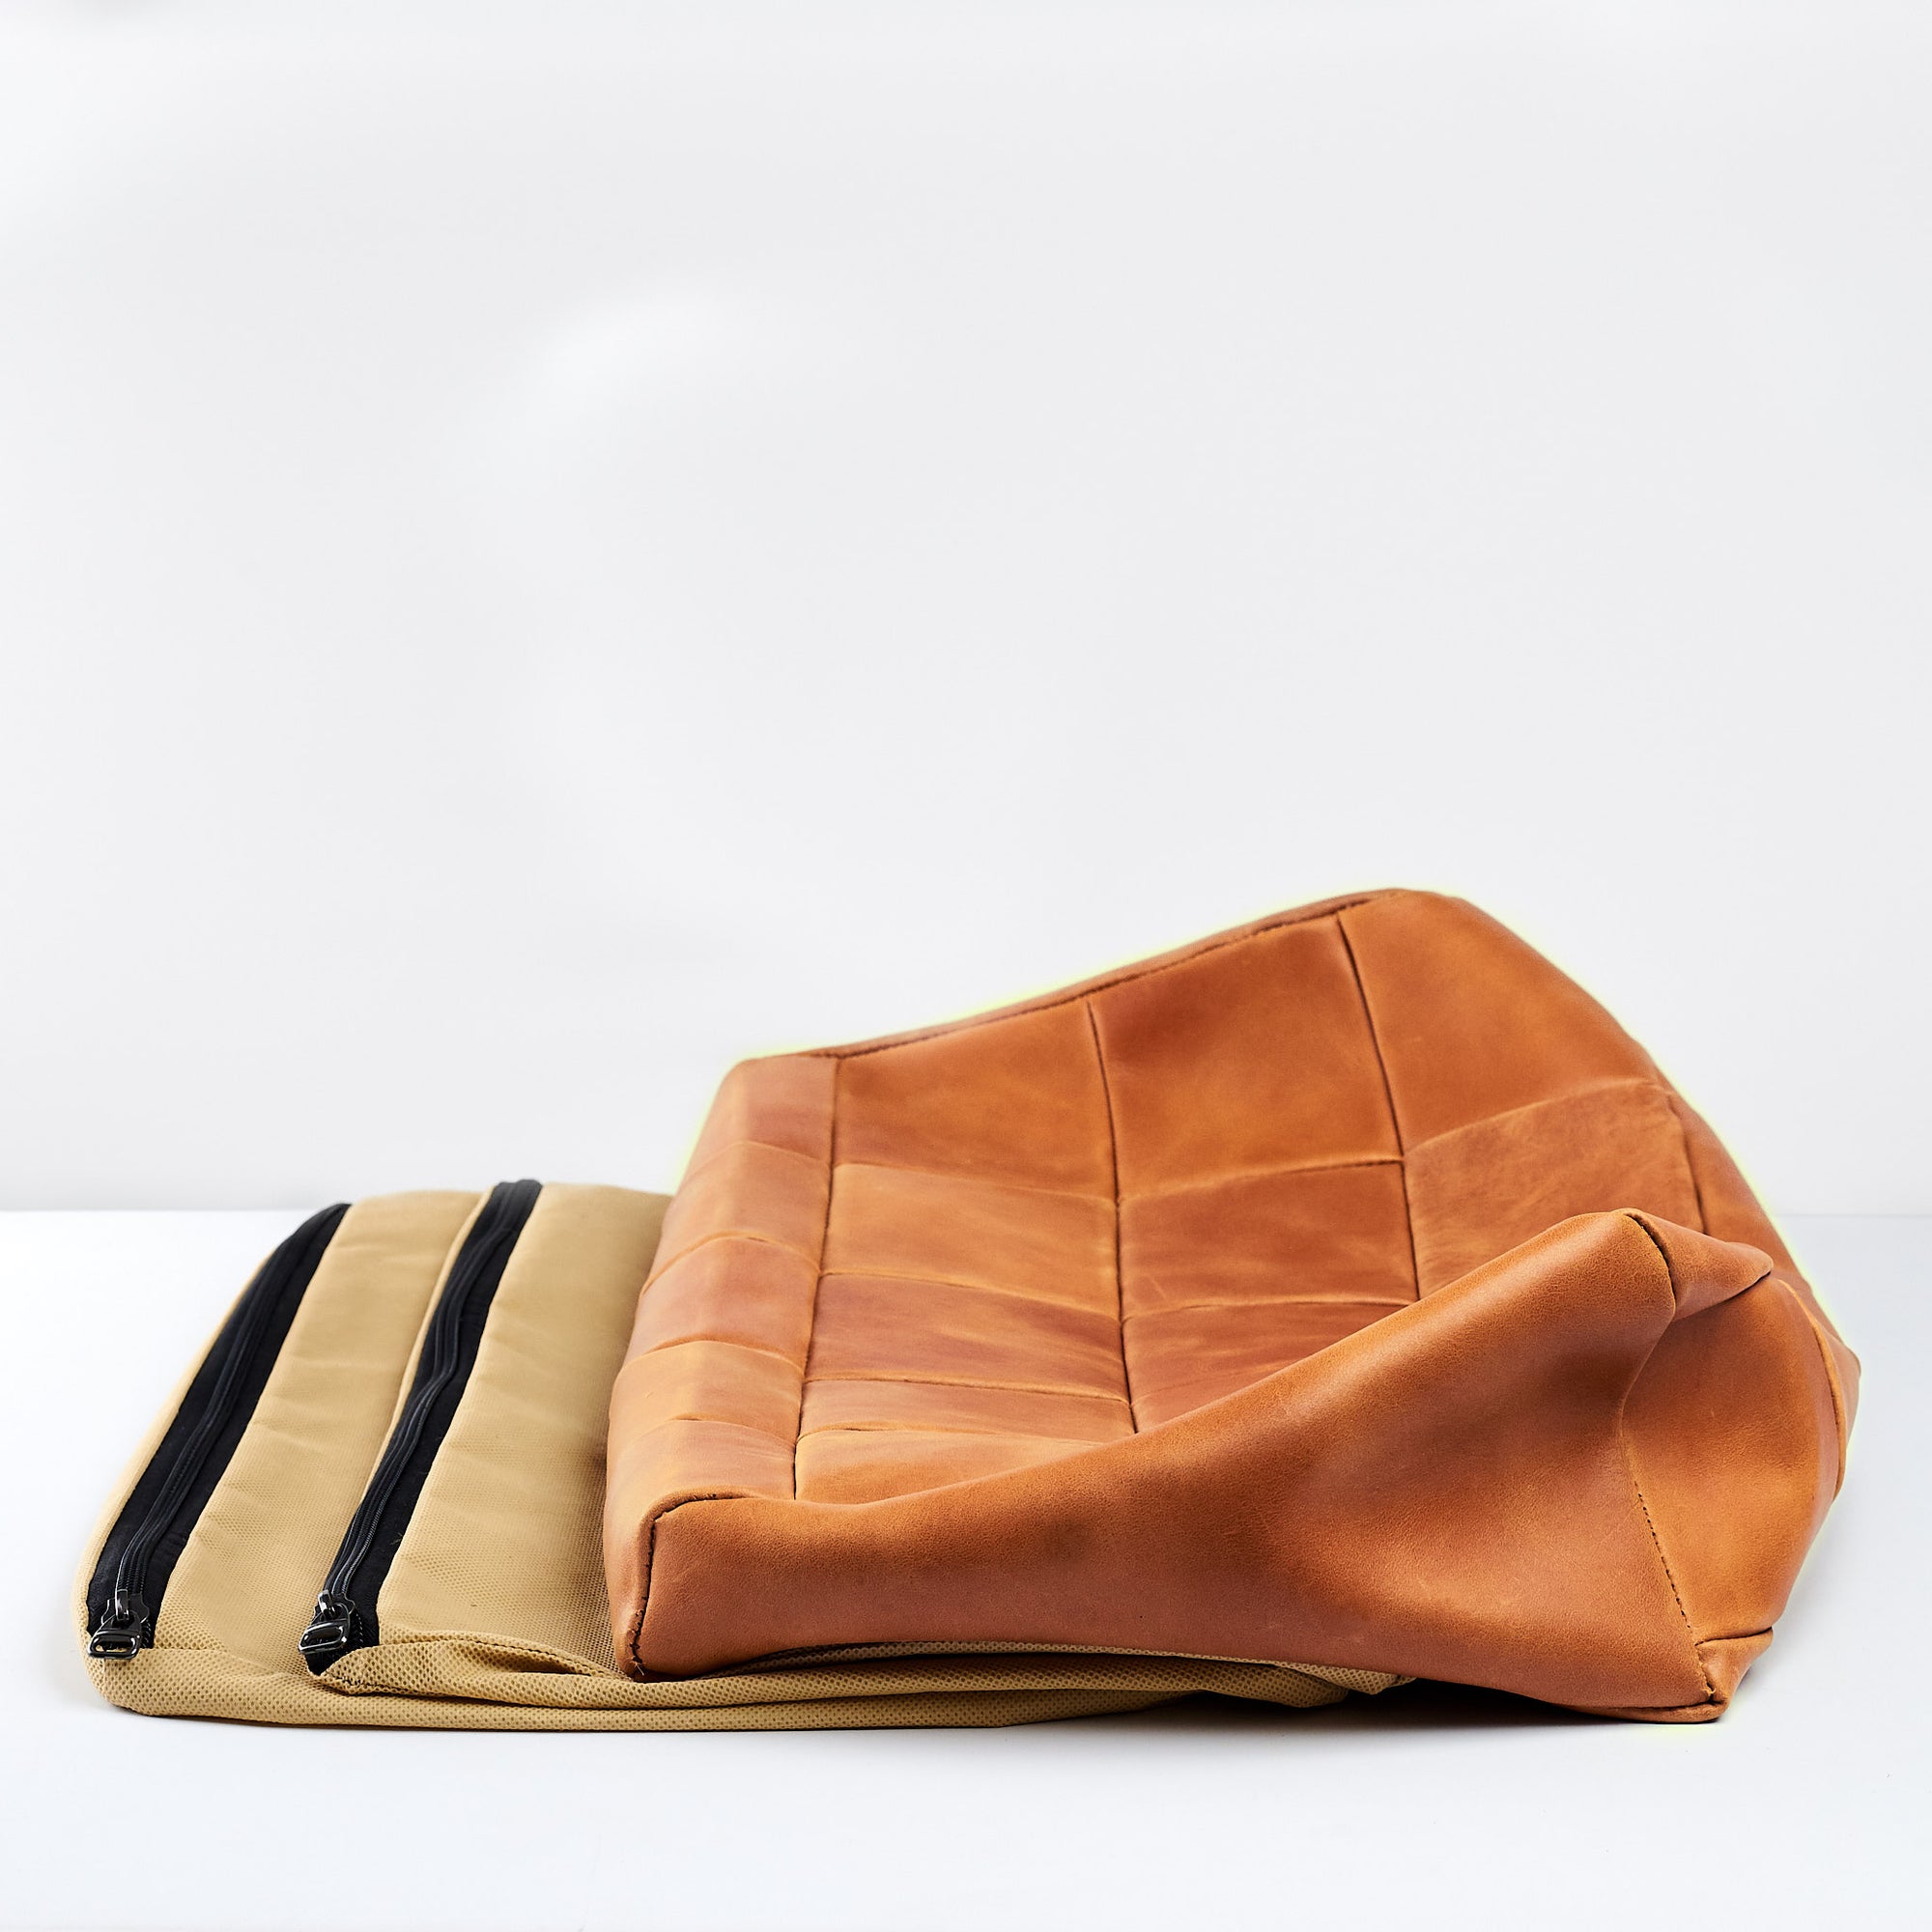 Inner Bags and Cover. Ergonomic under desk footrest cover in distressed tan by Capra Leather